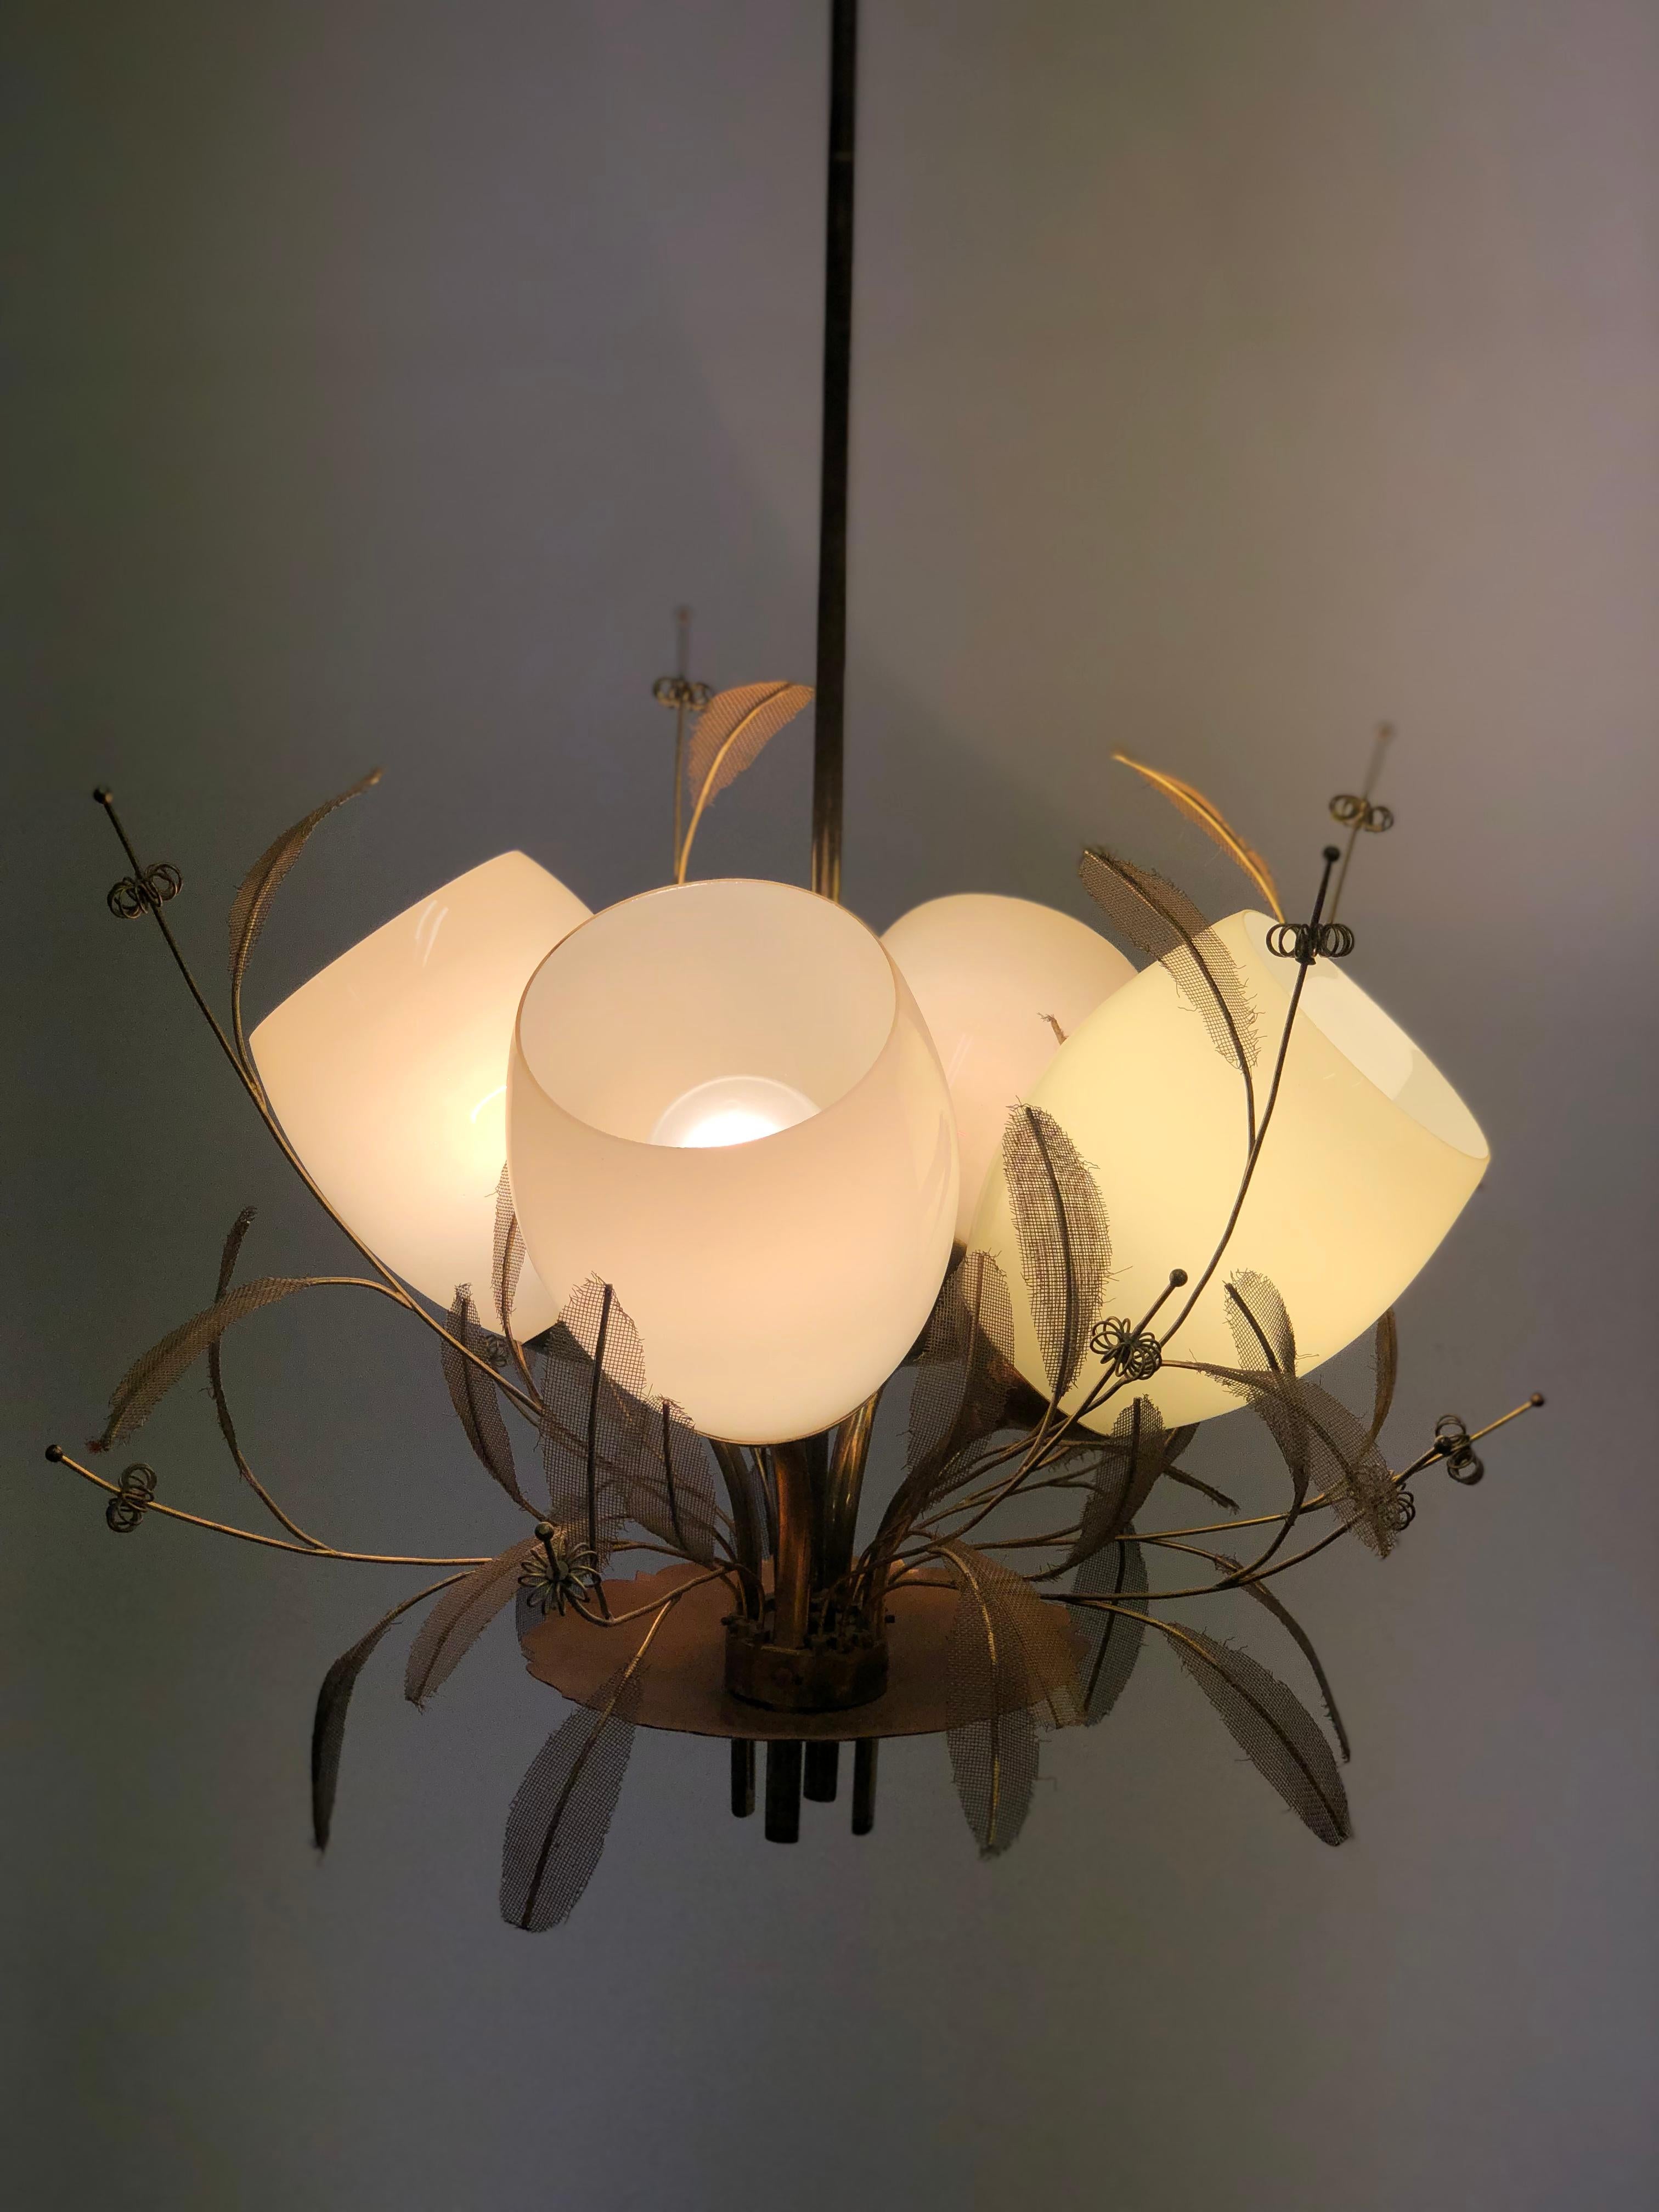 The classic 9029 chandelier by Paavo Tynell was made in various different sizes. This particular one is the one with four shades. Some refer to it as the 